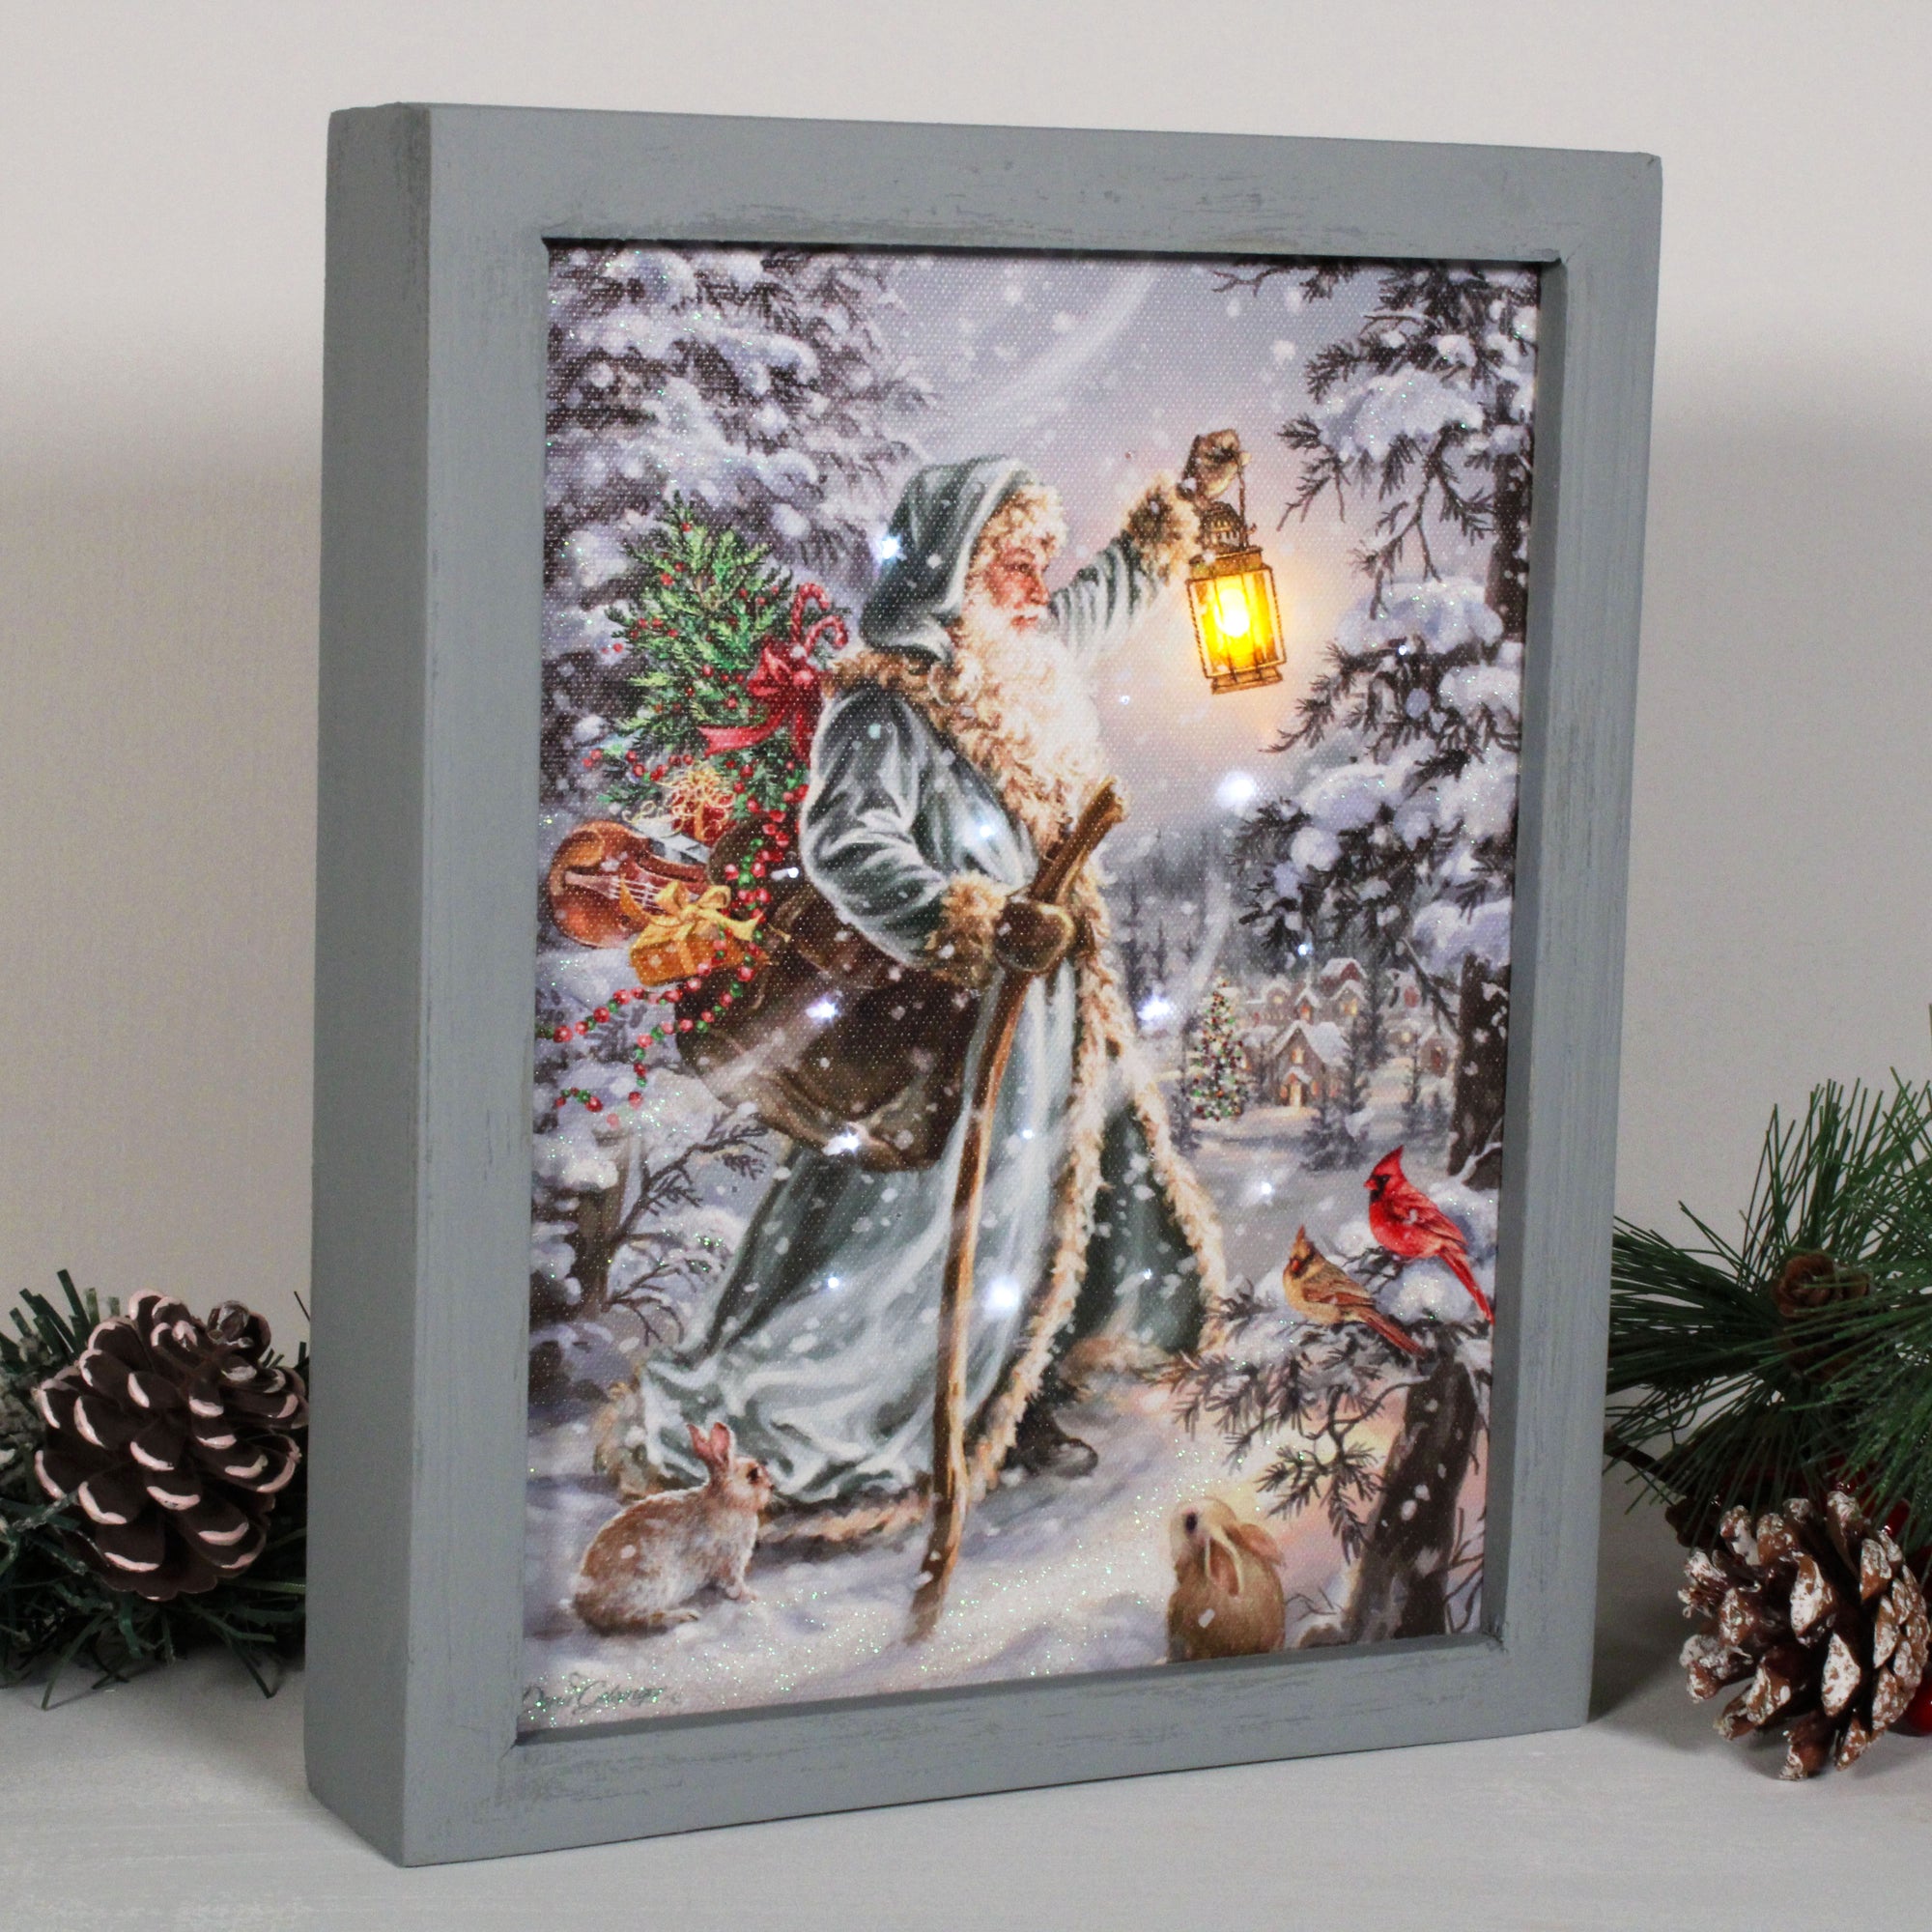 This enchanting piece captures the timeless romance of the holiday season with stunning detail.  In the shadow box, Saint Nicholas can be seen walking through a peaceful forest, his trusty lantern lighting the way as he makes his journey towards the nearby town. His sack of gifts, overflowing with treasures, is slung over his shoulder, ready to bring joy and wonder to all who cross his path.